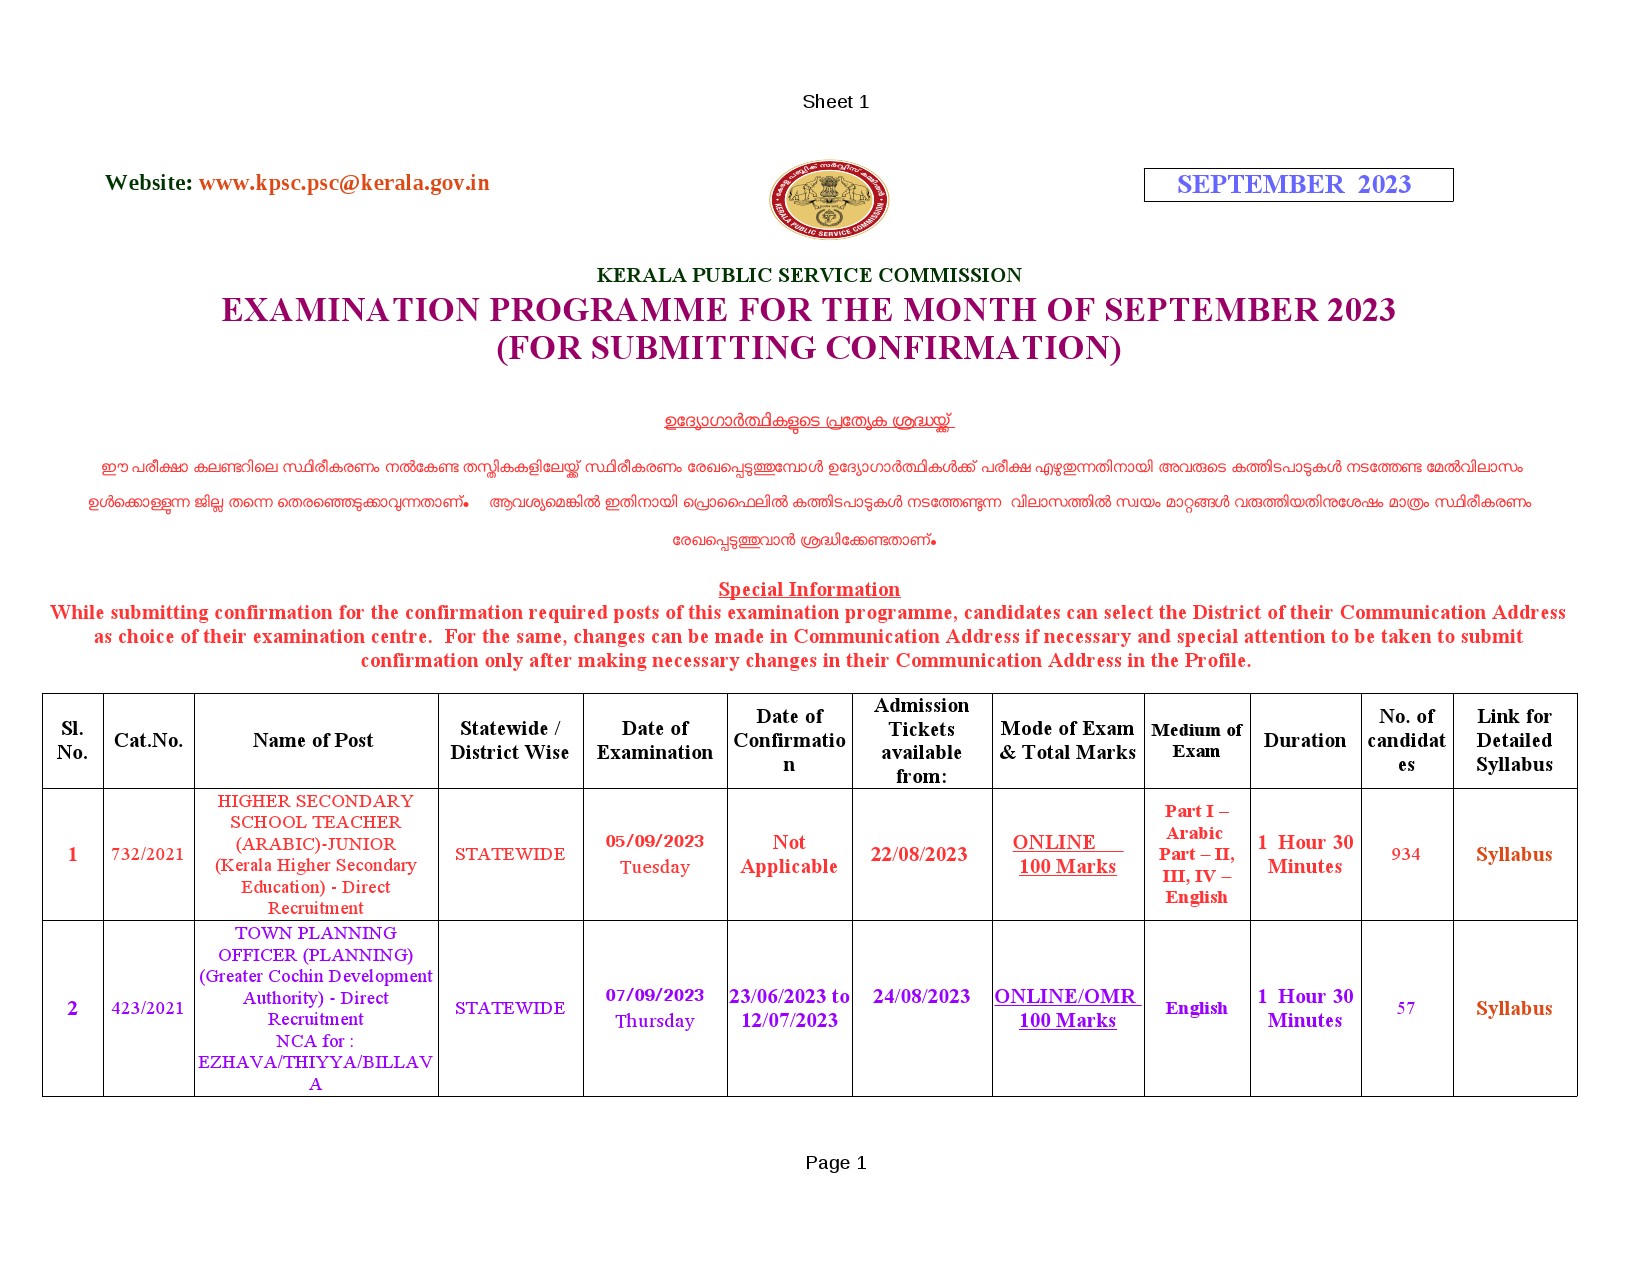 EXAMINATION PROGRAMME FOR THE MONTH OF SEPTEMBER 2023 - Notification Image 1